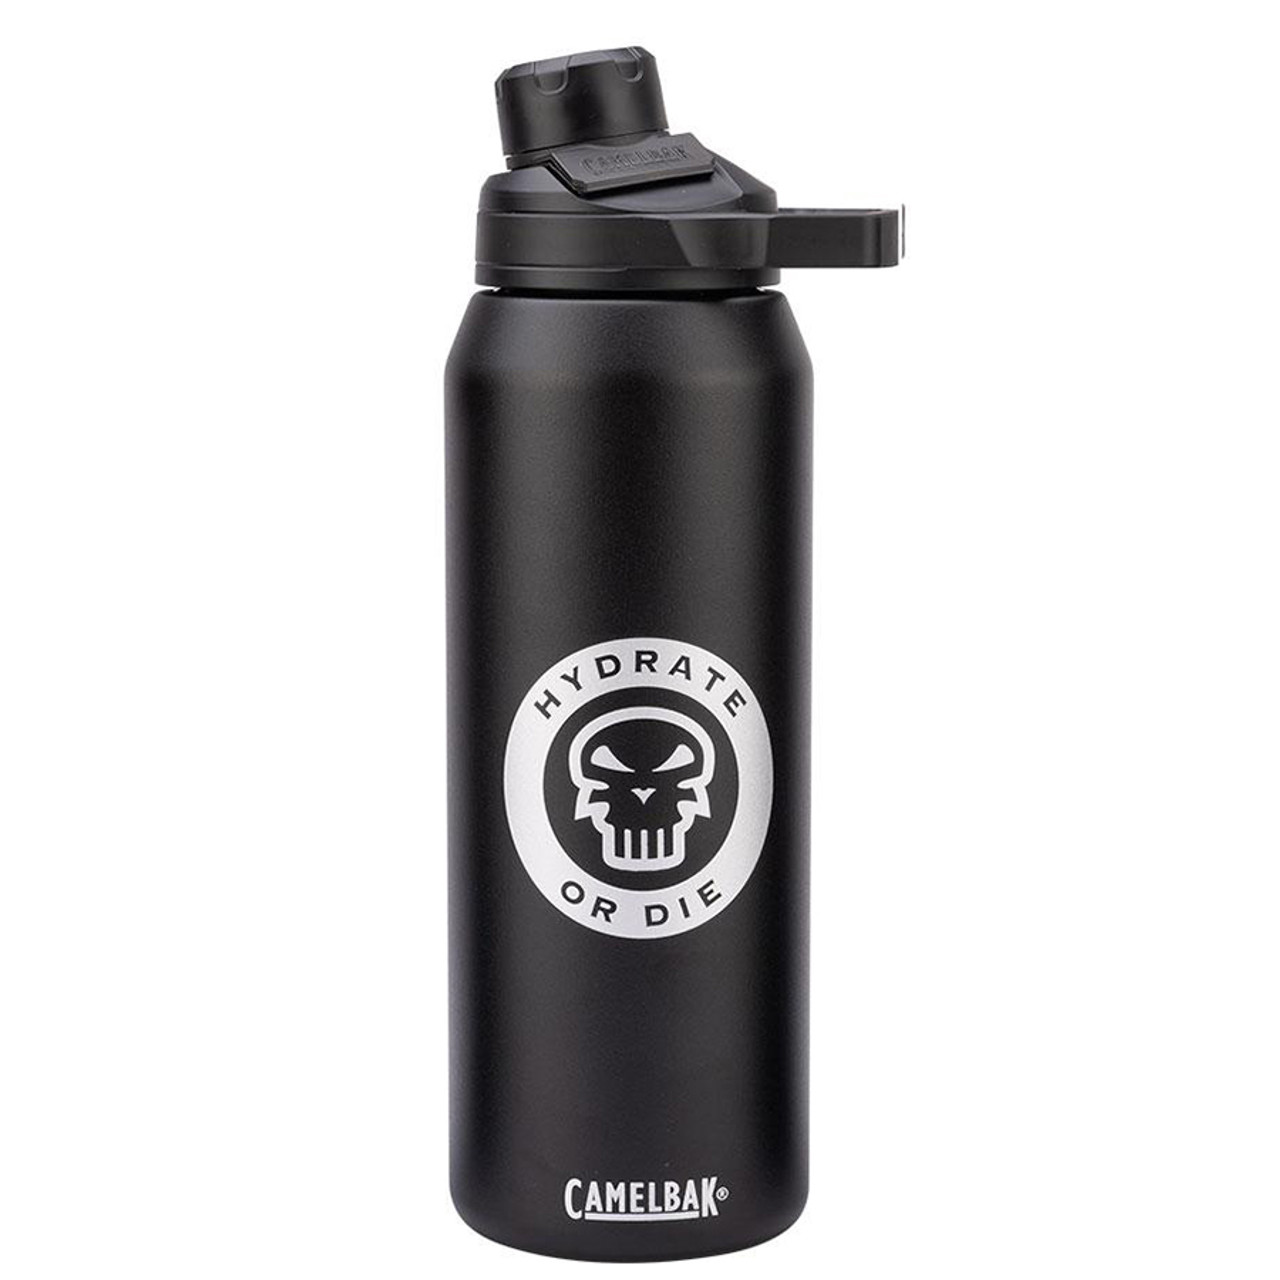 CamelBak Chute Mag Vacuum Insulated Stainless 20 Oz. - Pedal Power